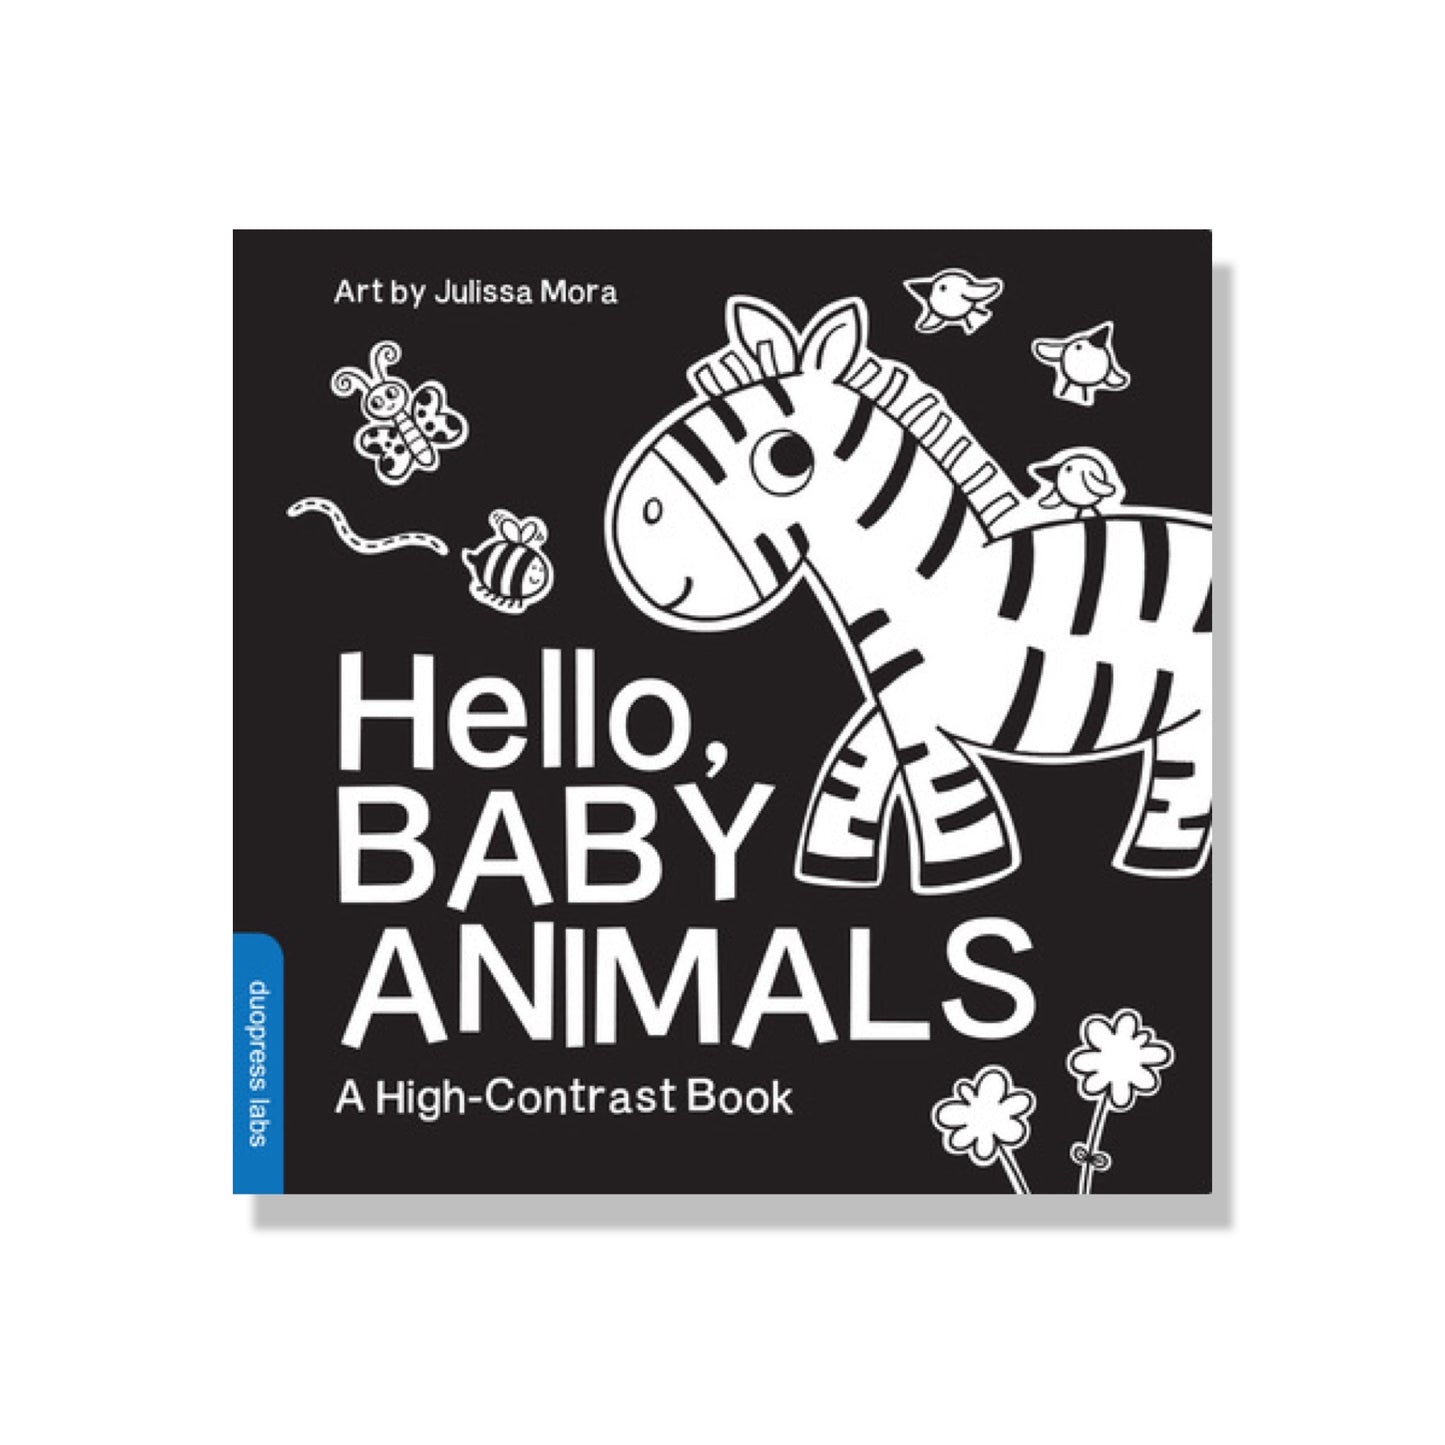 Hello, Baby Animals: A Durable High-Contrast Black-And-White Board Book for Newborns and Babies